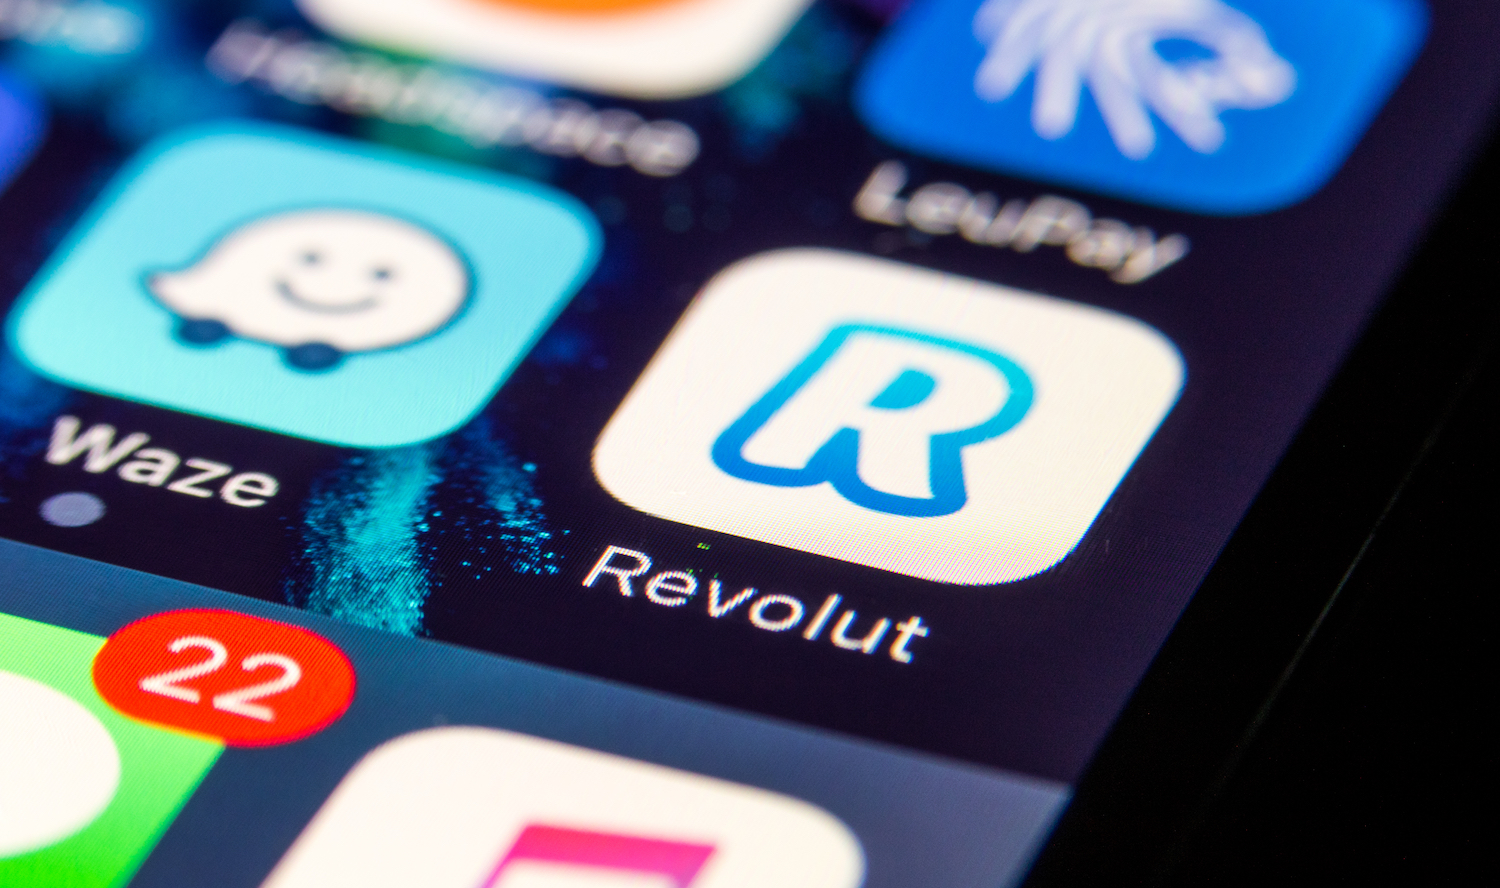 Digital-bank-revolut-adds-stellar-to-list-of-supported-cryptocurrencies